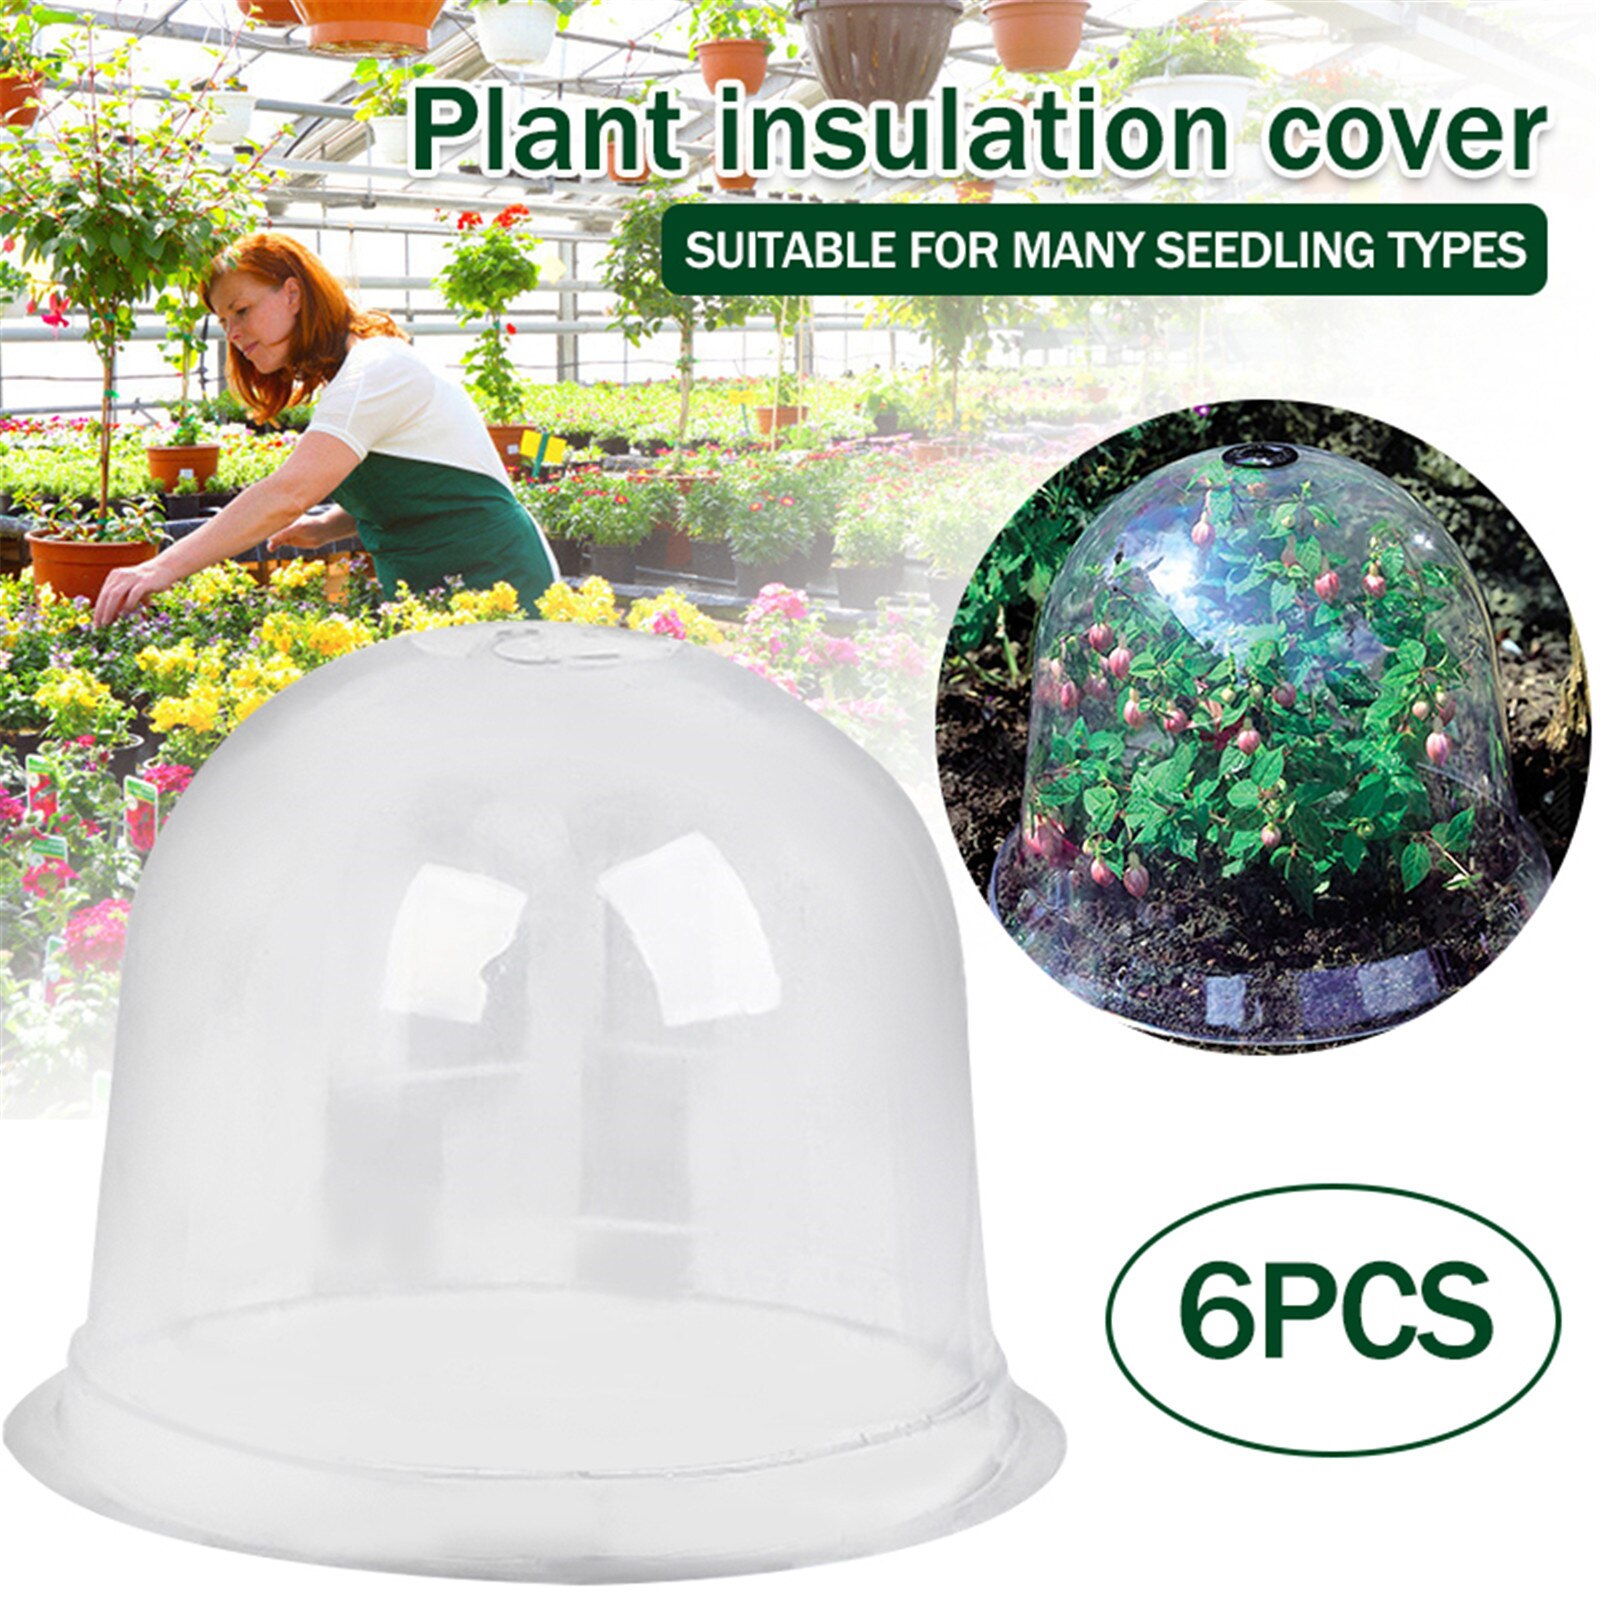 4 # Tuin Cloche Dome Plant Bell Protector Cover Plastic Voor Plant Bescherming Plastic Freeze Koude Plant Bescherming Tuin Deksels